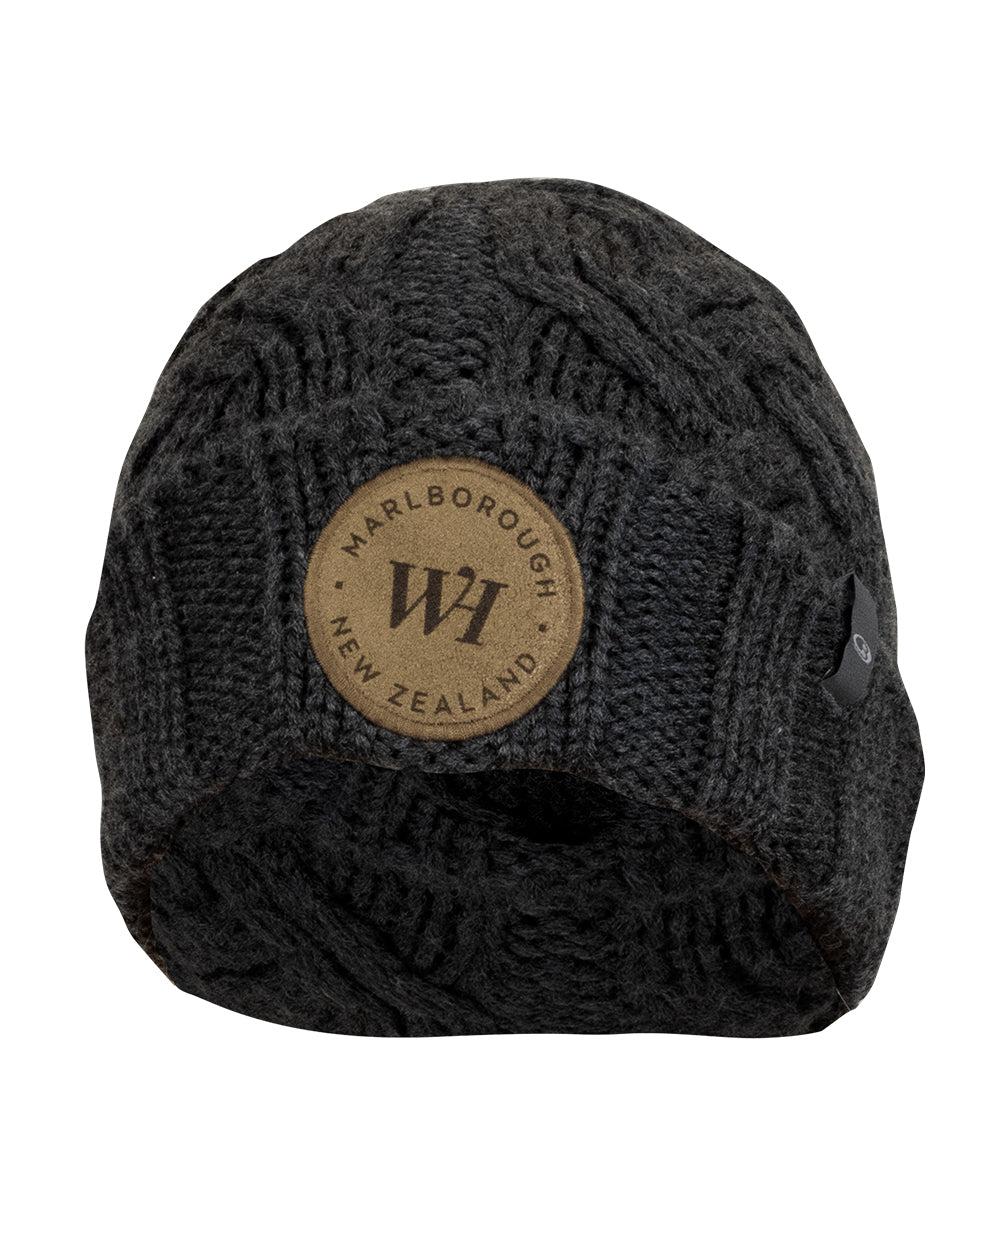 Wither Hills Icebreaker Beanie -  Beer Gear Apparel & Merchandise - Speights - Lion Red - VB - Tokyo Dy merch